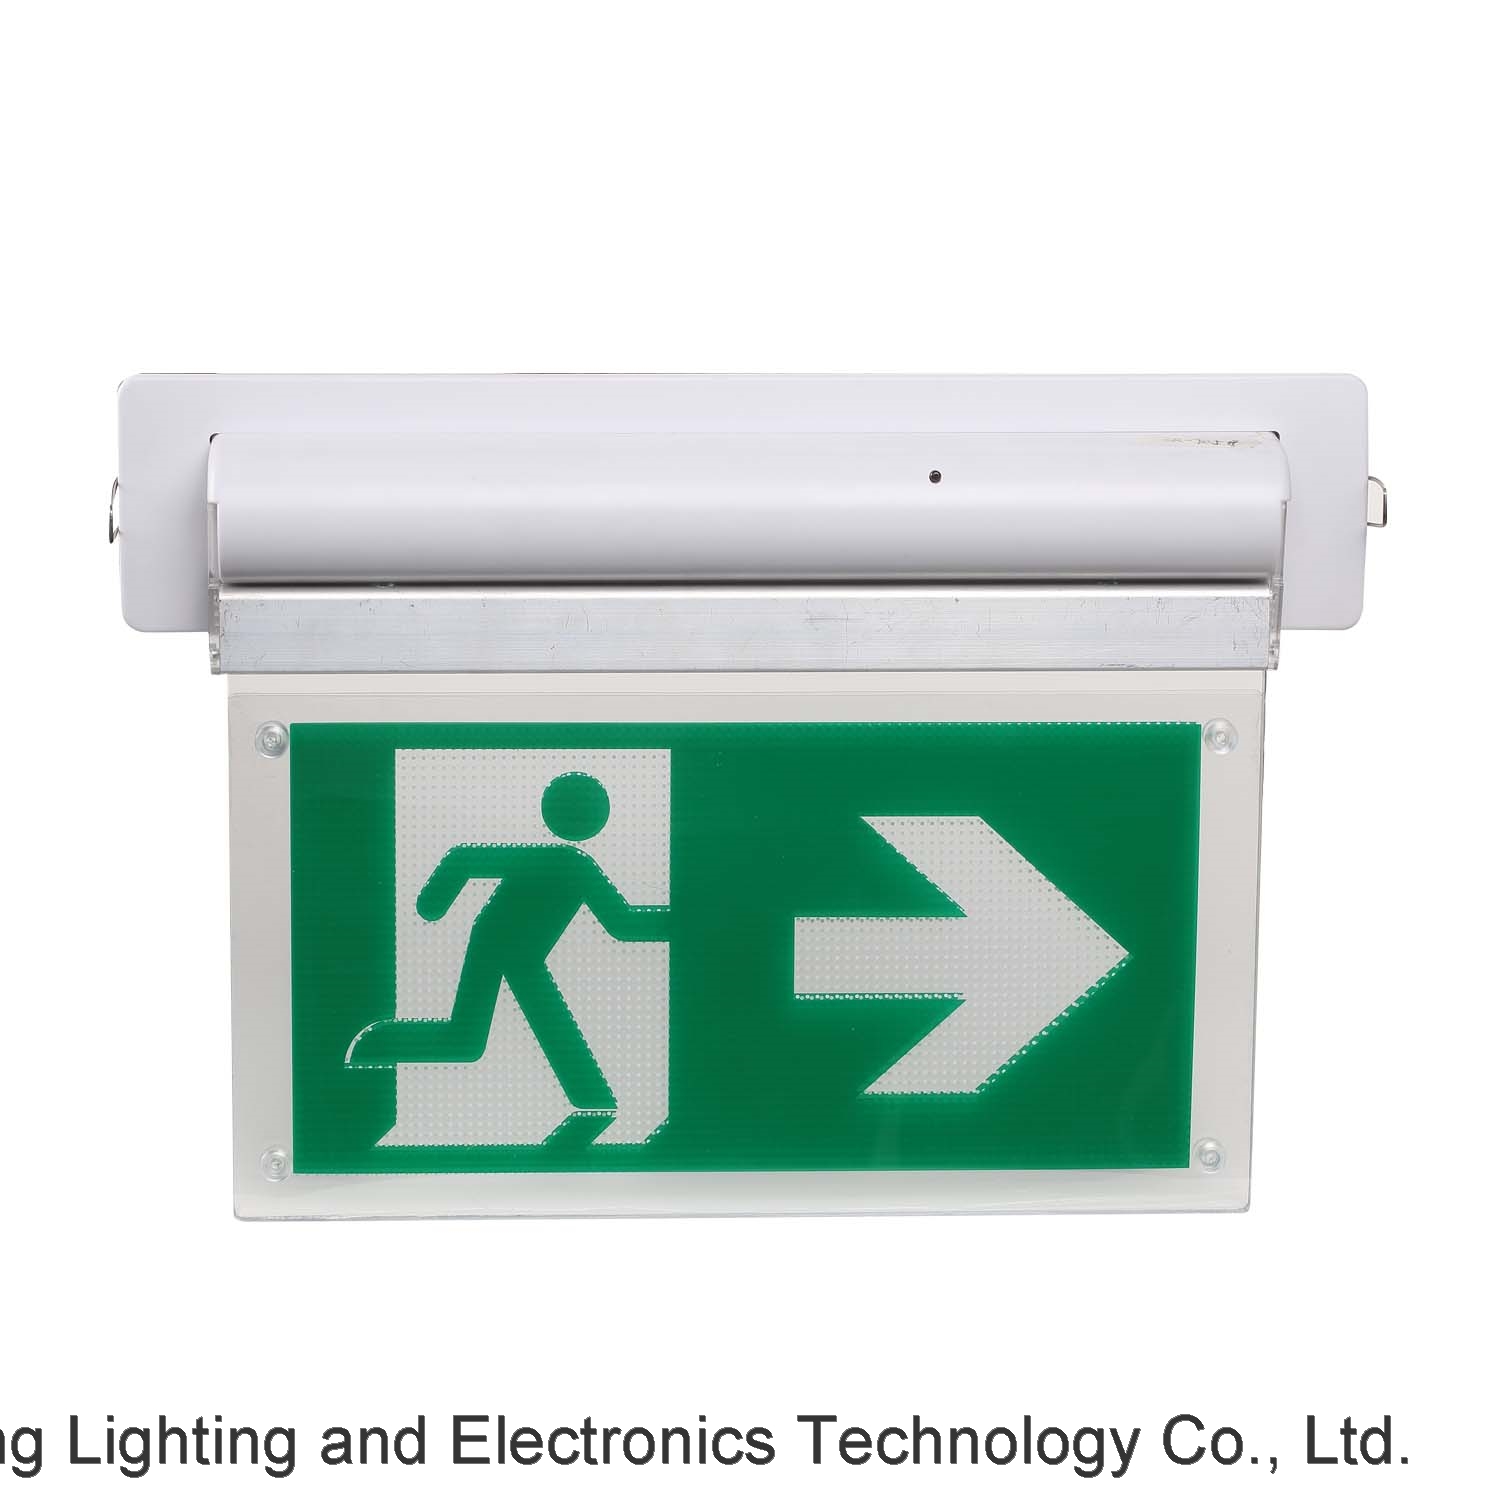 CE Approved LED Running Man Exit Sign CR-7058